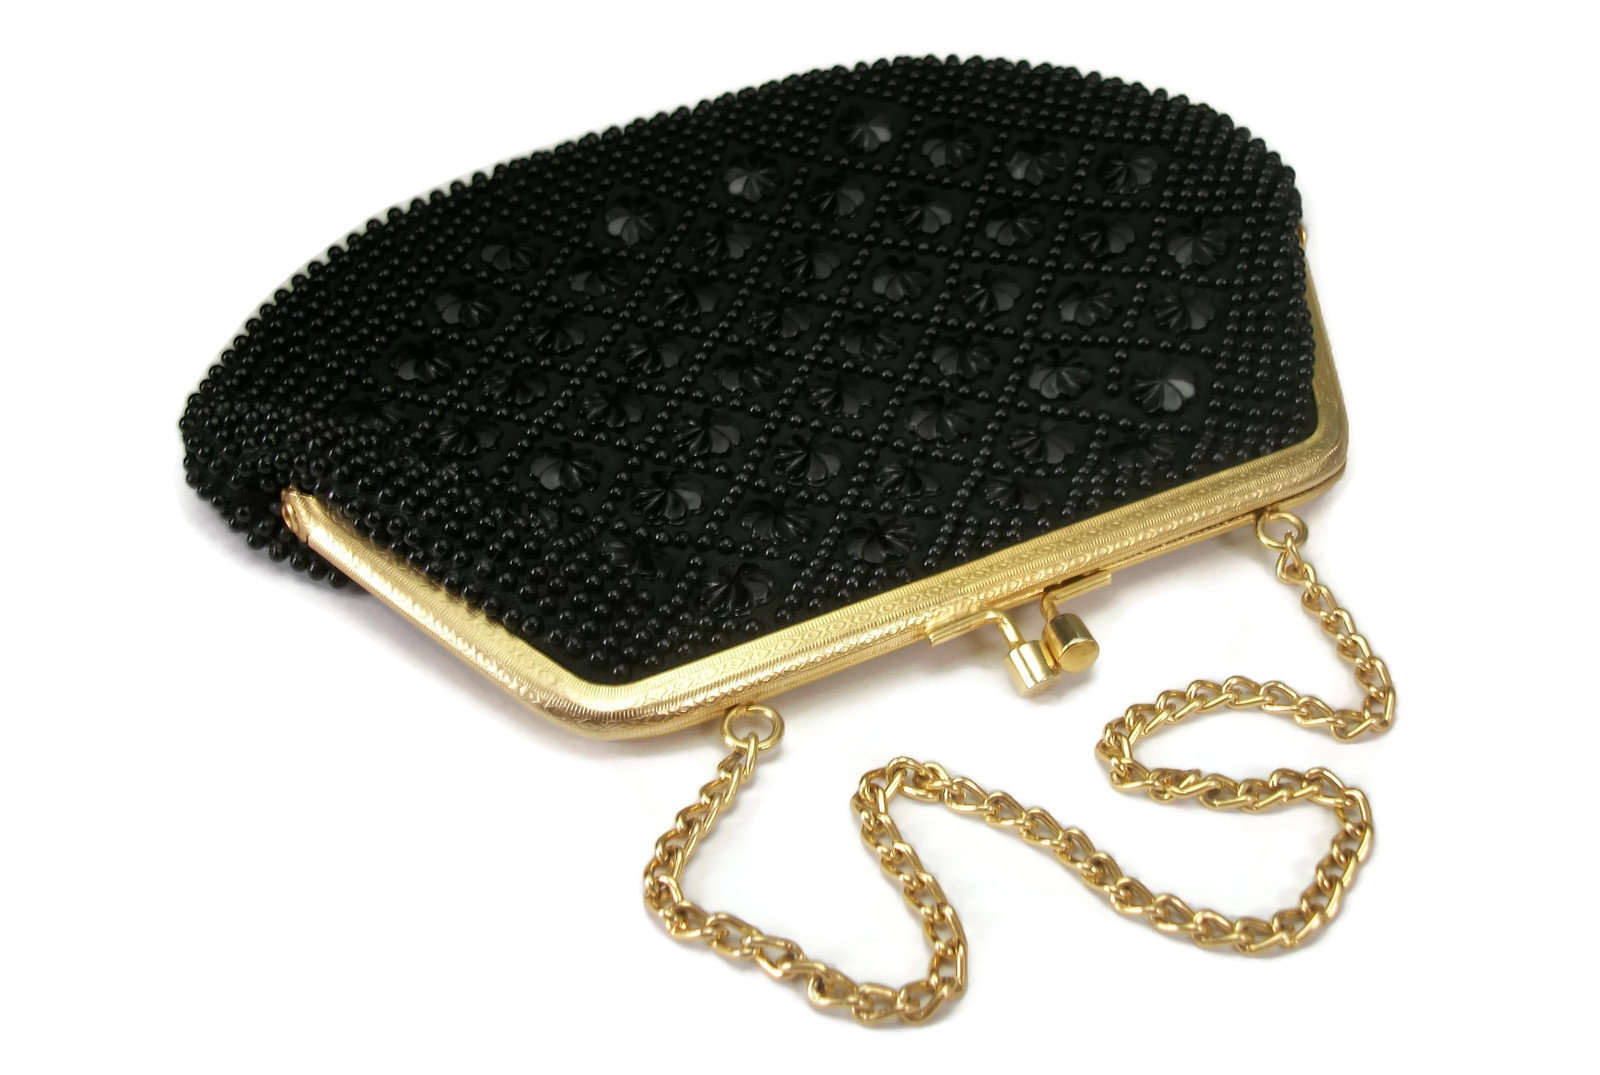 Vintage Black Beaded Evening Purse Clutch Gold Chain Link Safety